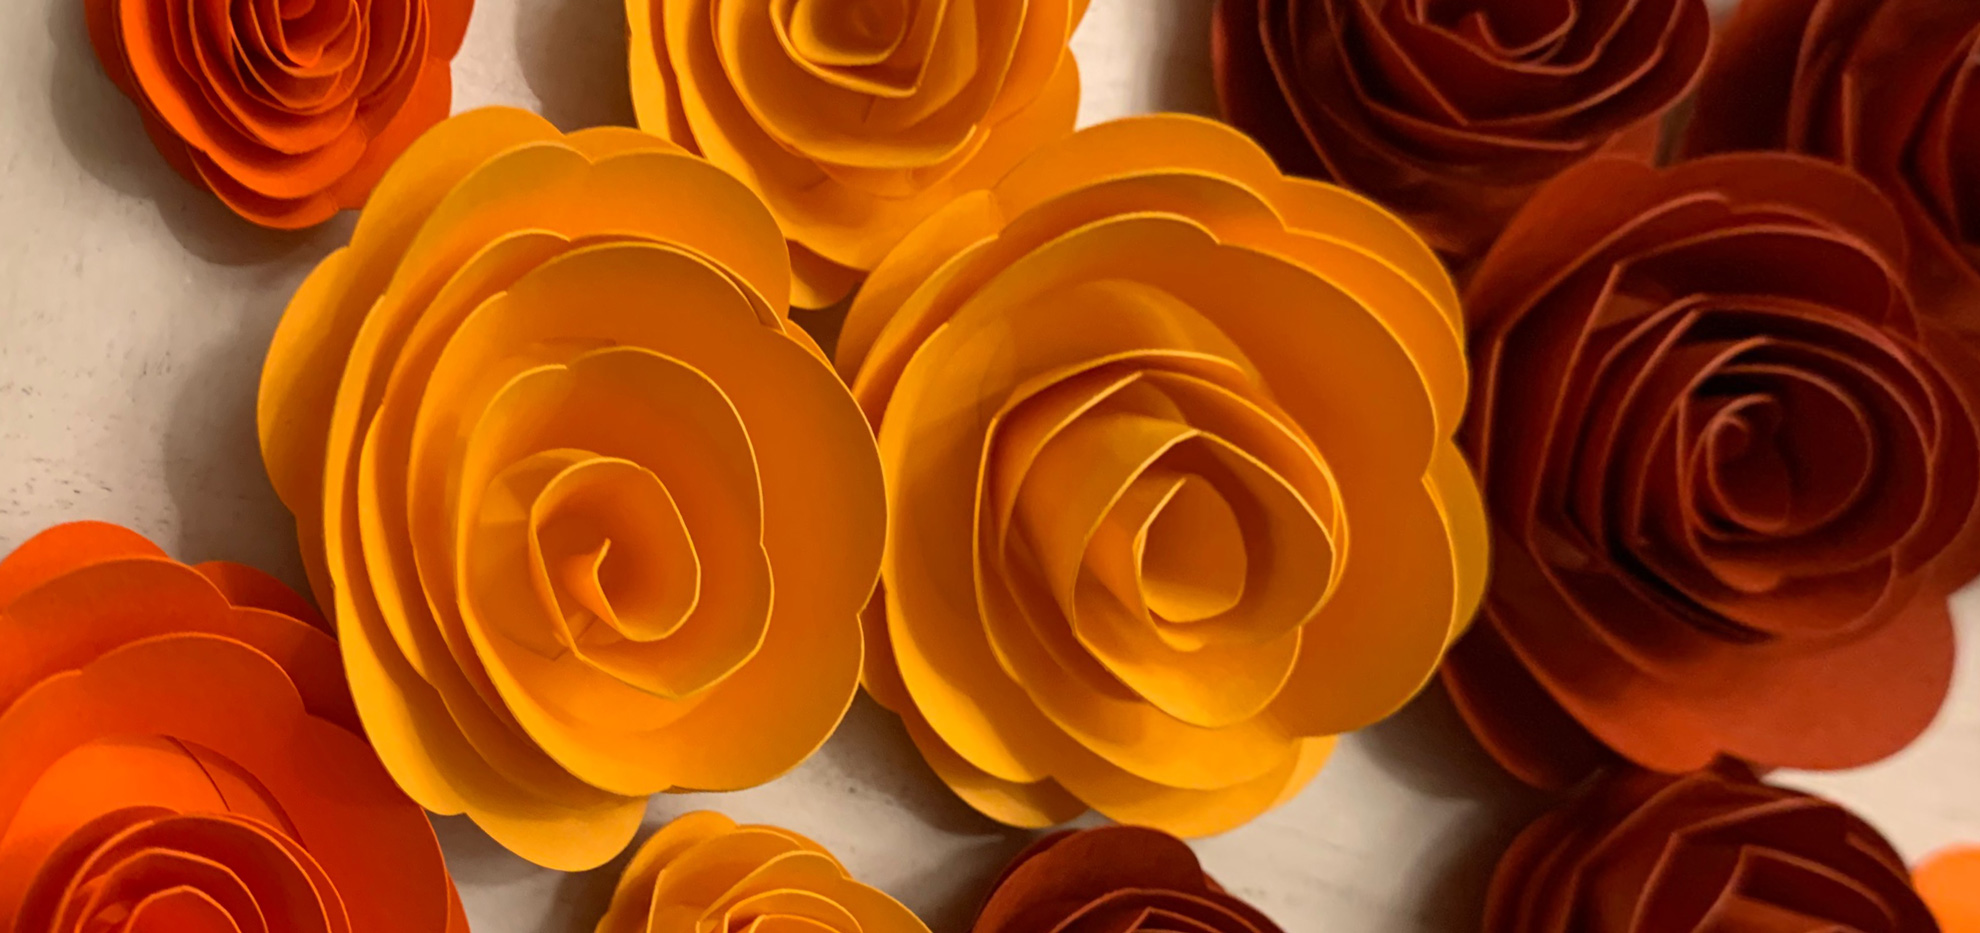 Easy paper flowers to show thanks